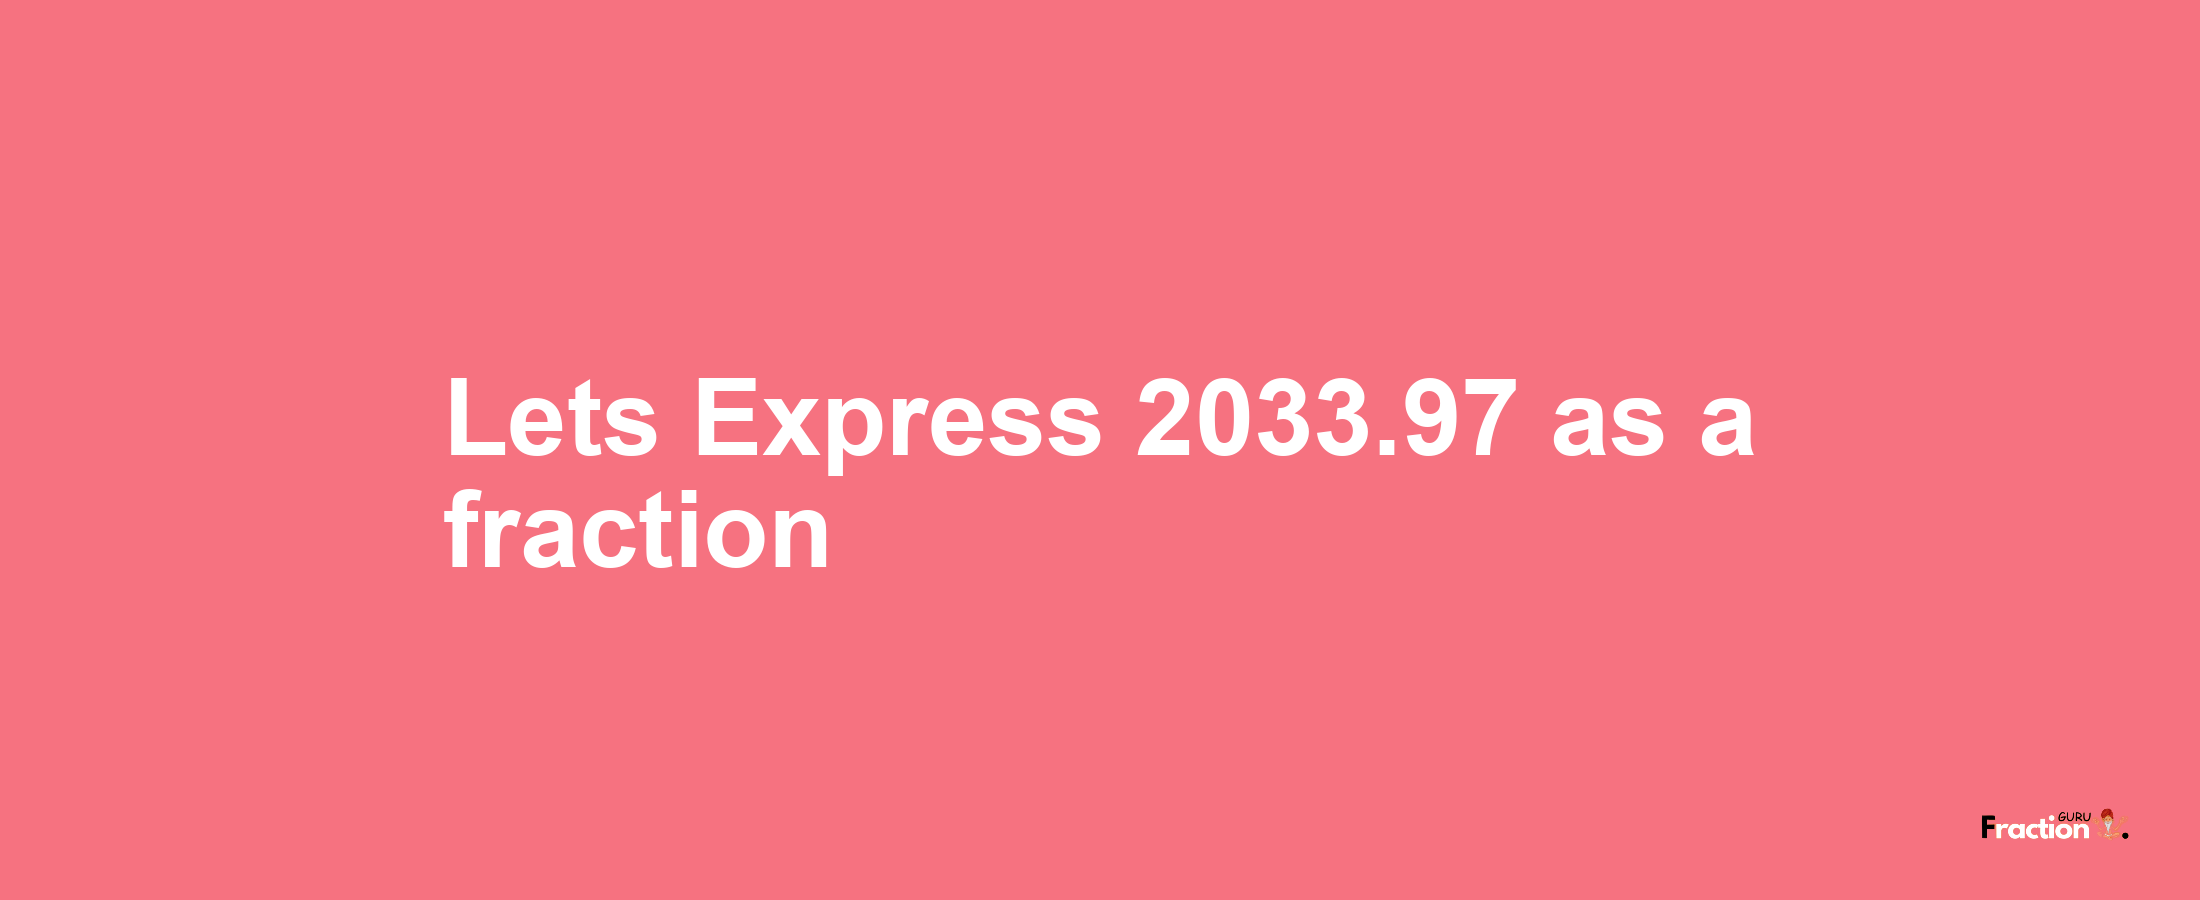 Lets Express 2033.97 as afraction